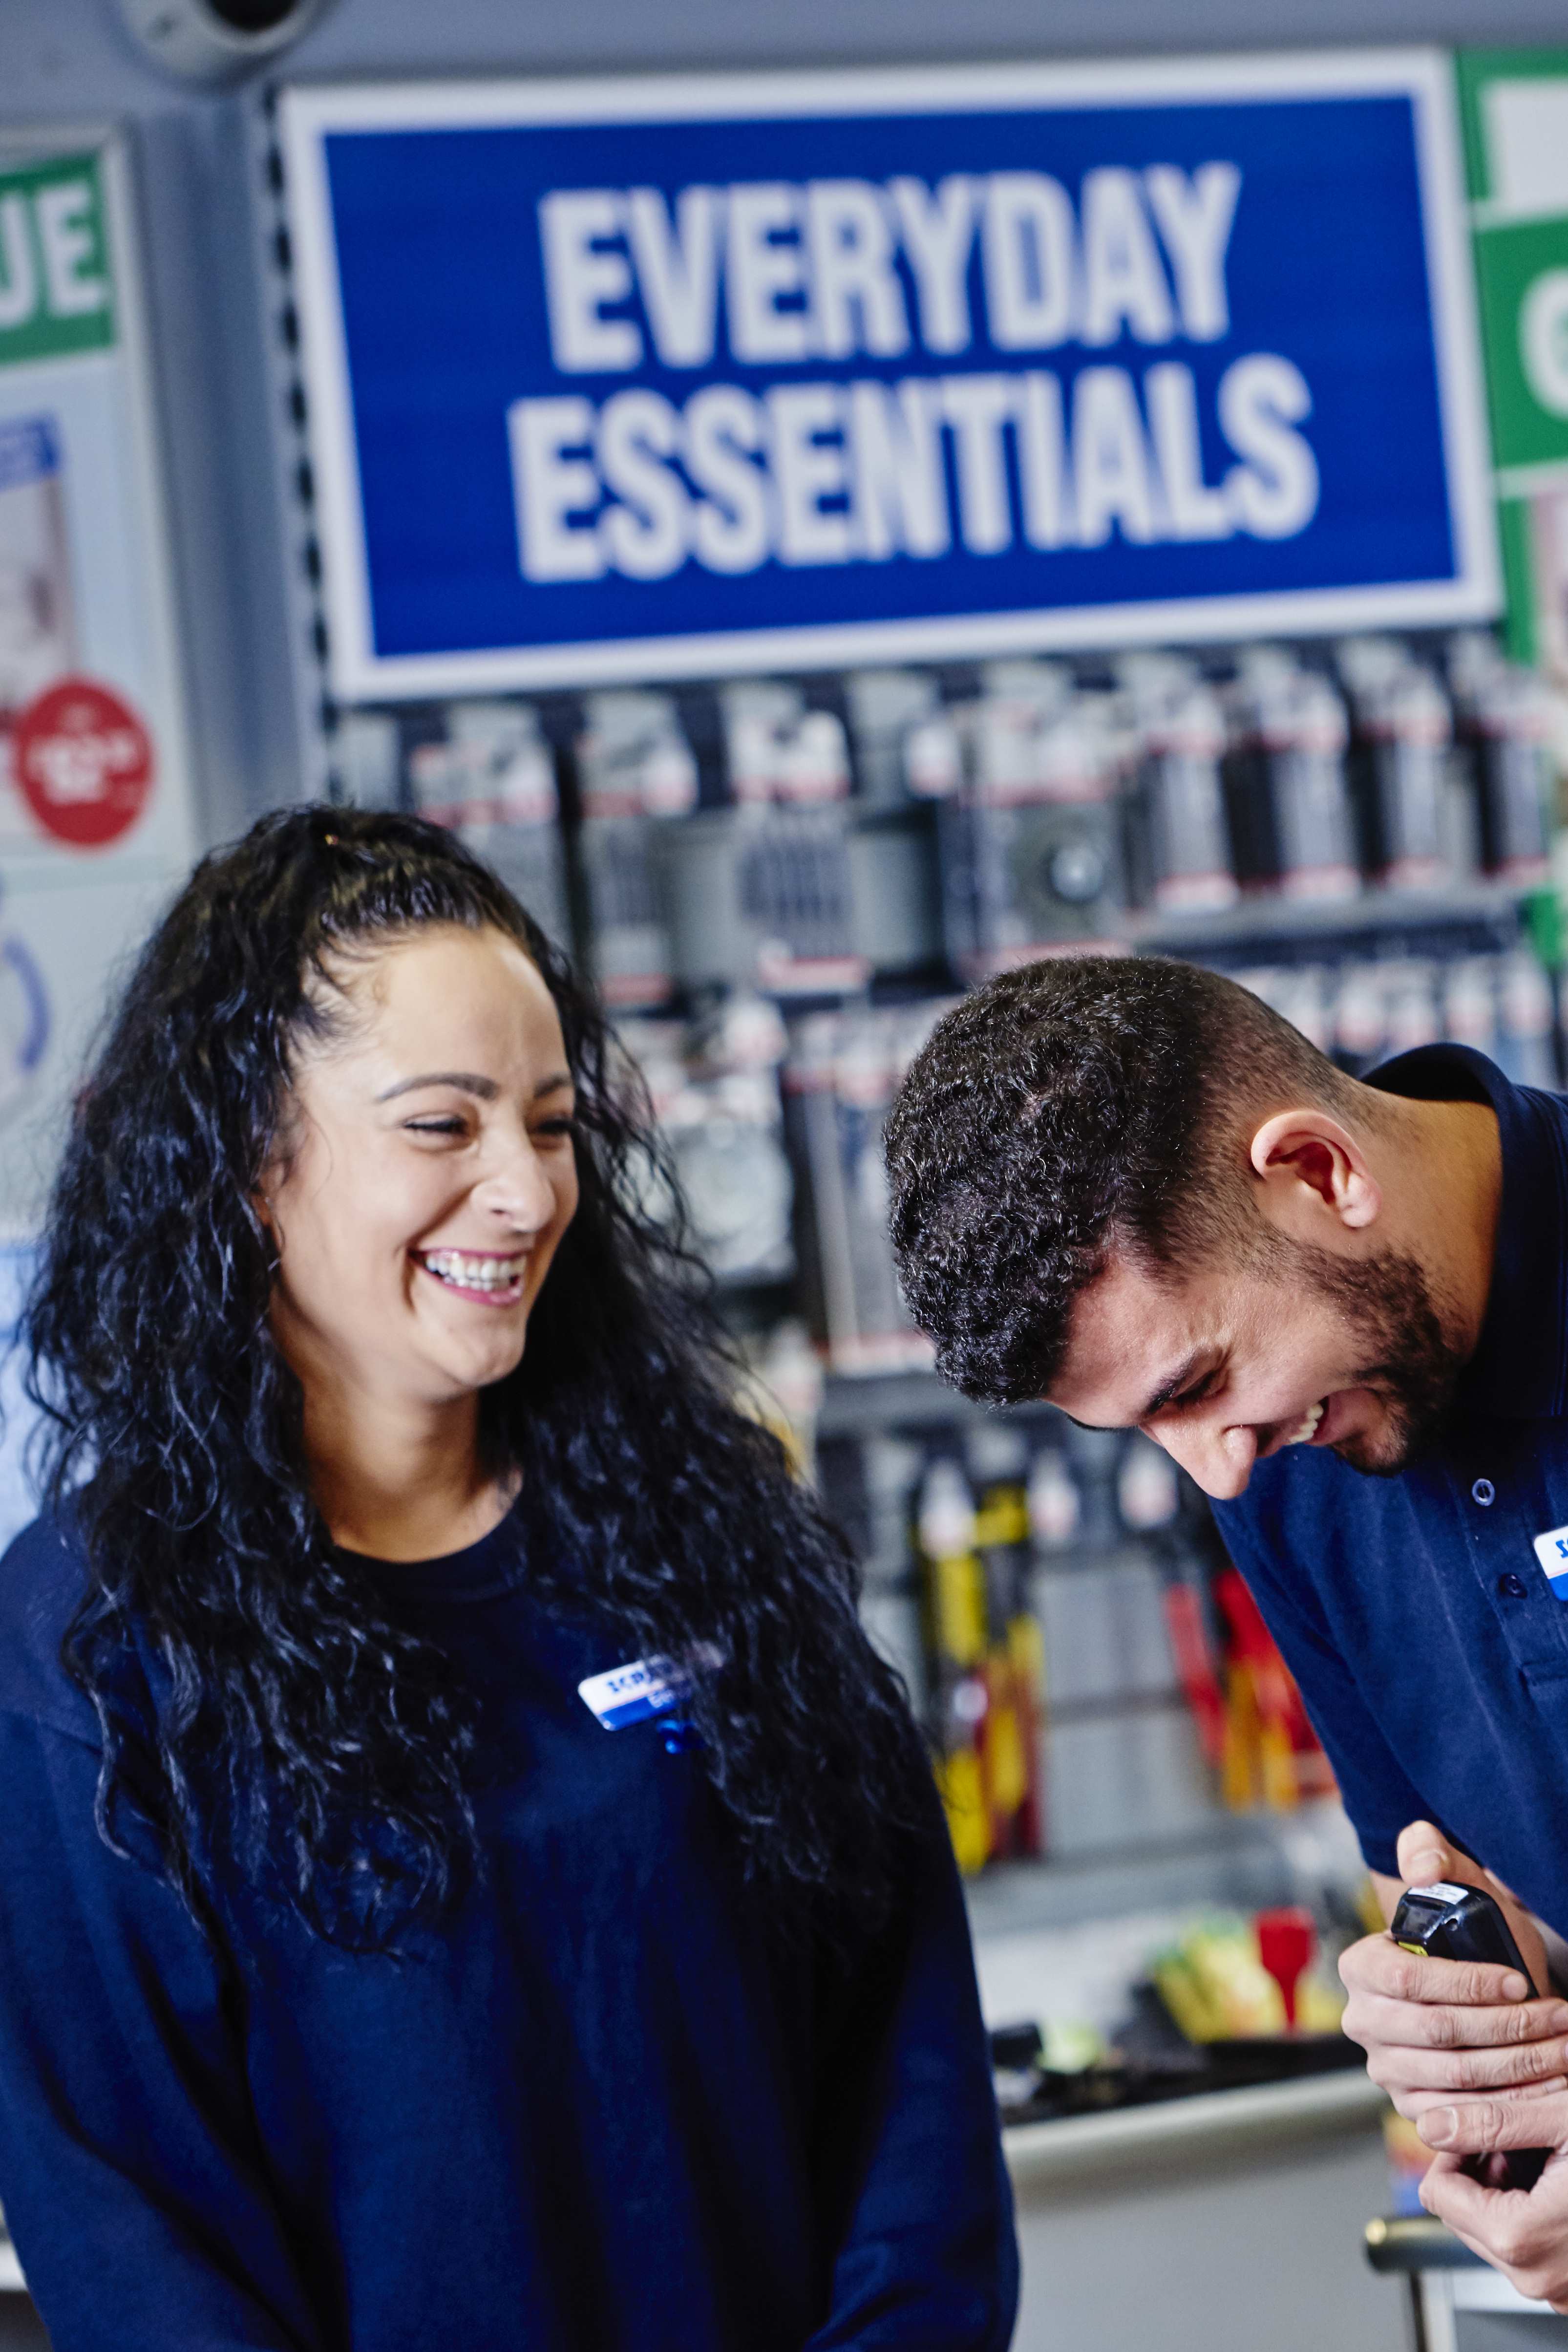 Great result for Screwfix in best employer rankings